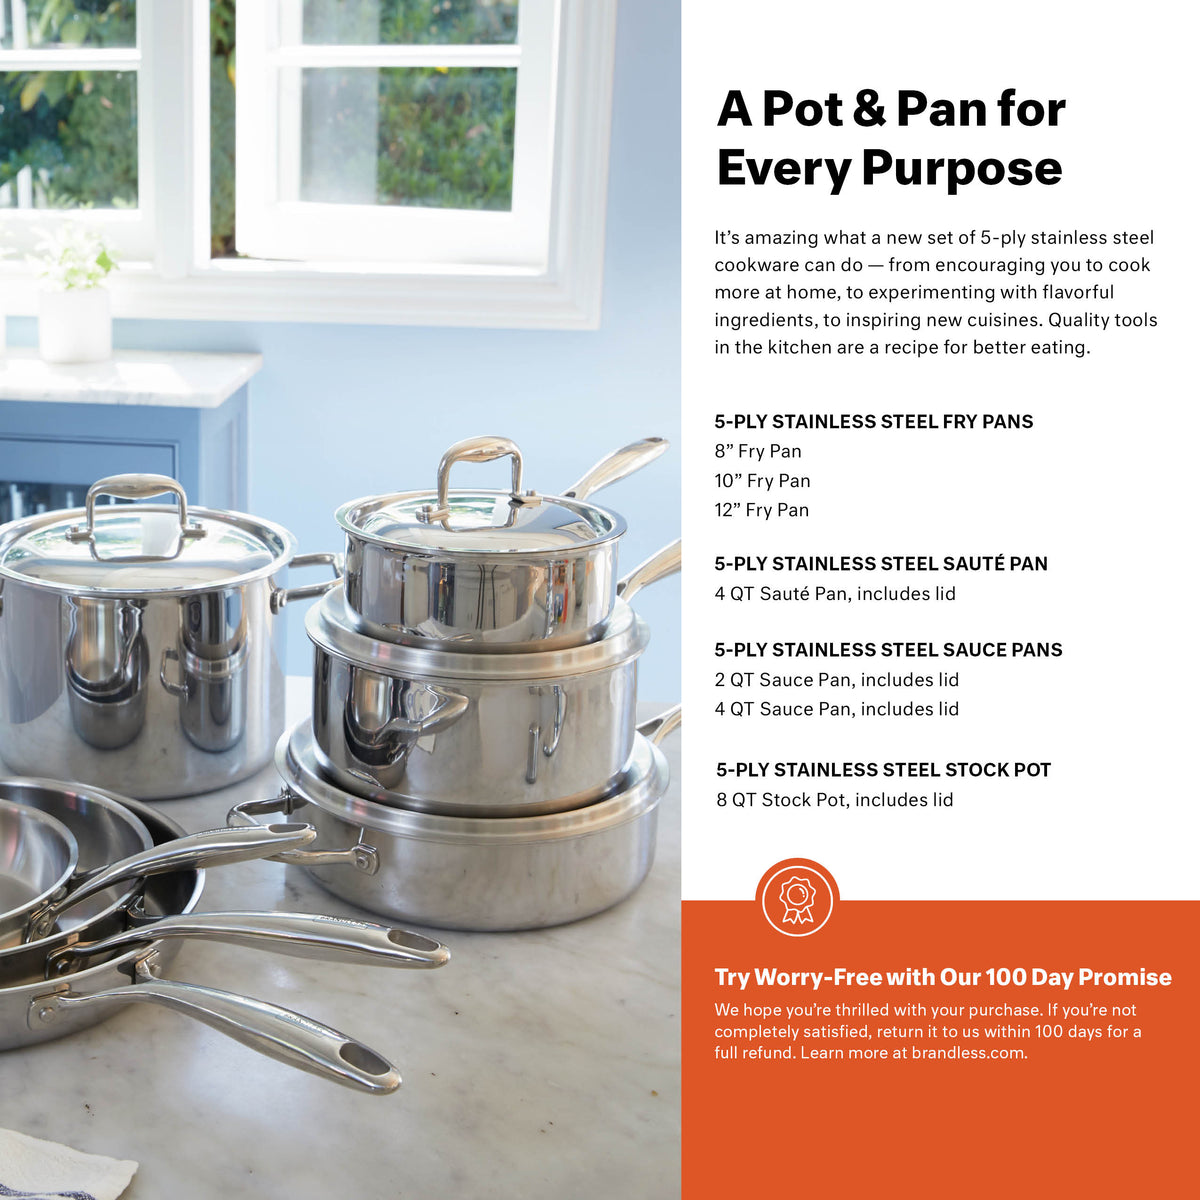 A pot &amp; Pan for Every Purpose. It&#39;s amazing what a new set of 5-ply stainless steel cookware can do - from encouraging you to cook more at home, to experimenting with flavorful ingredients, to inspiring new cuisines. Quality tools in the kitchen are a recipe for better eating.